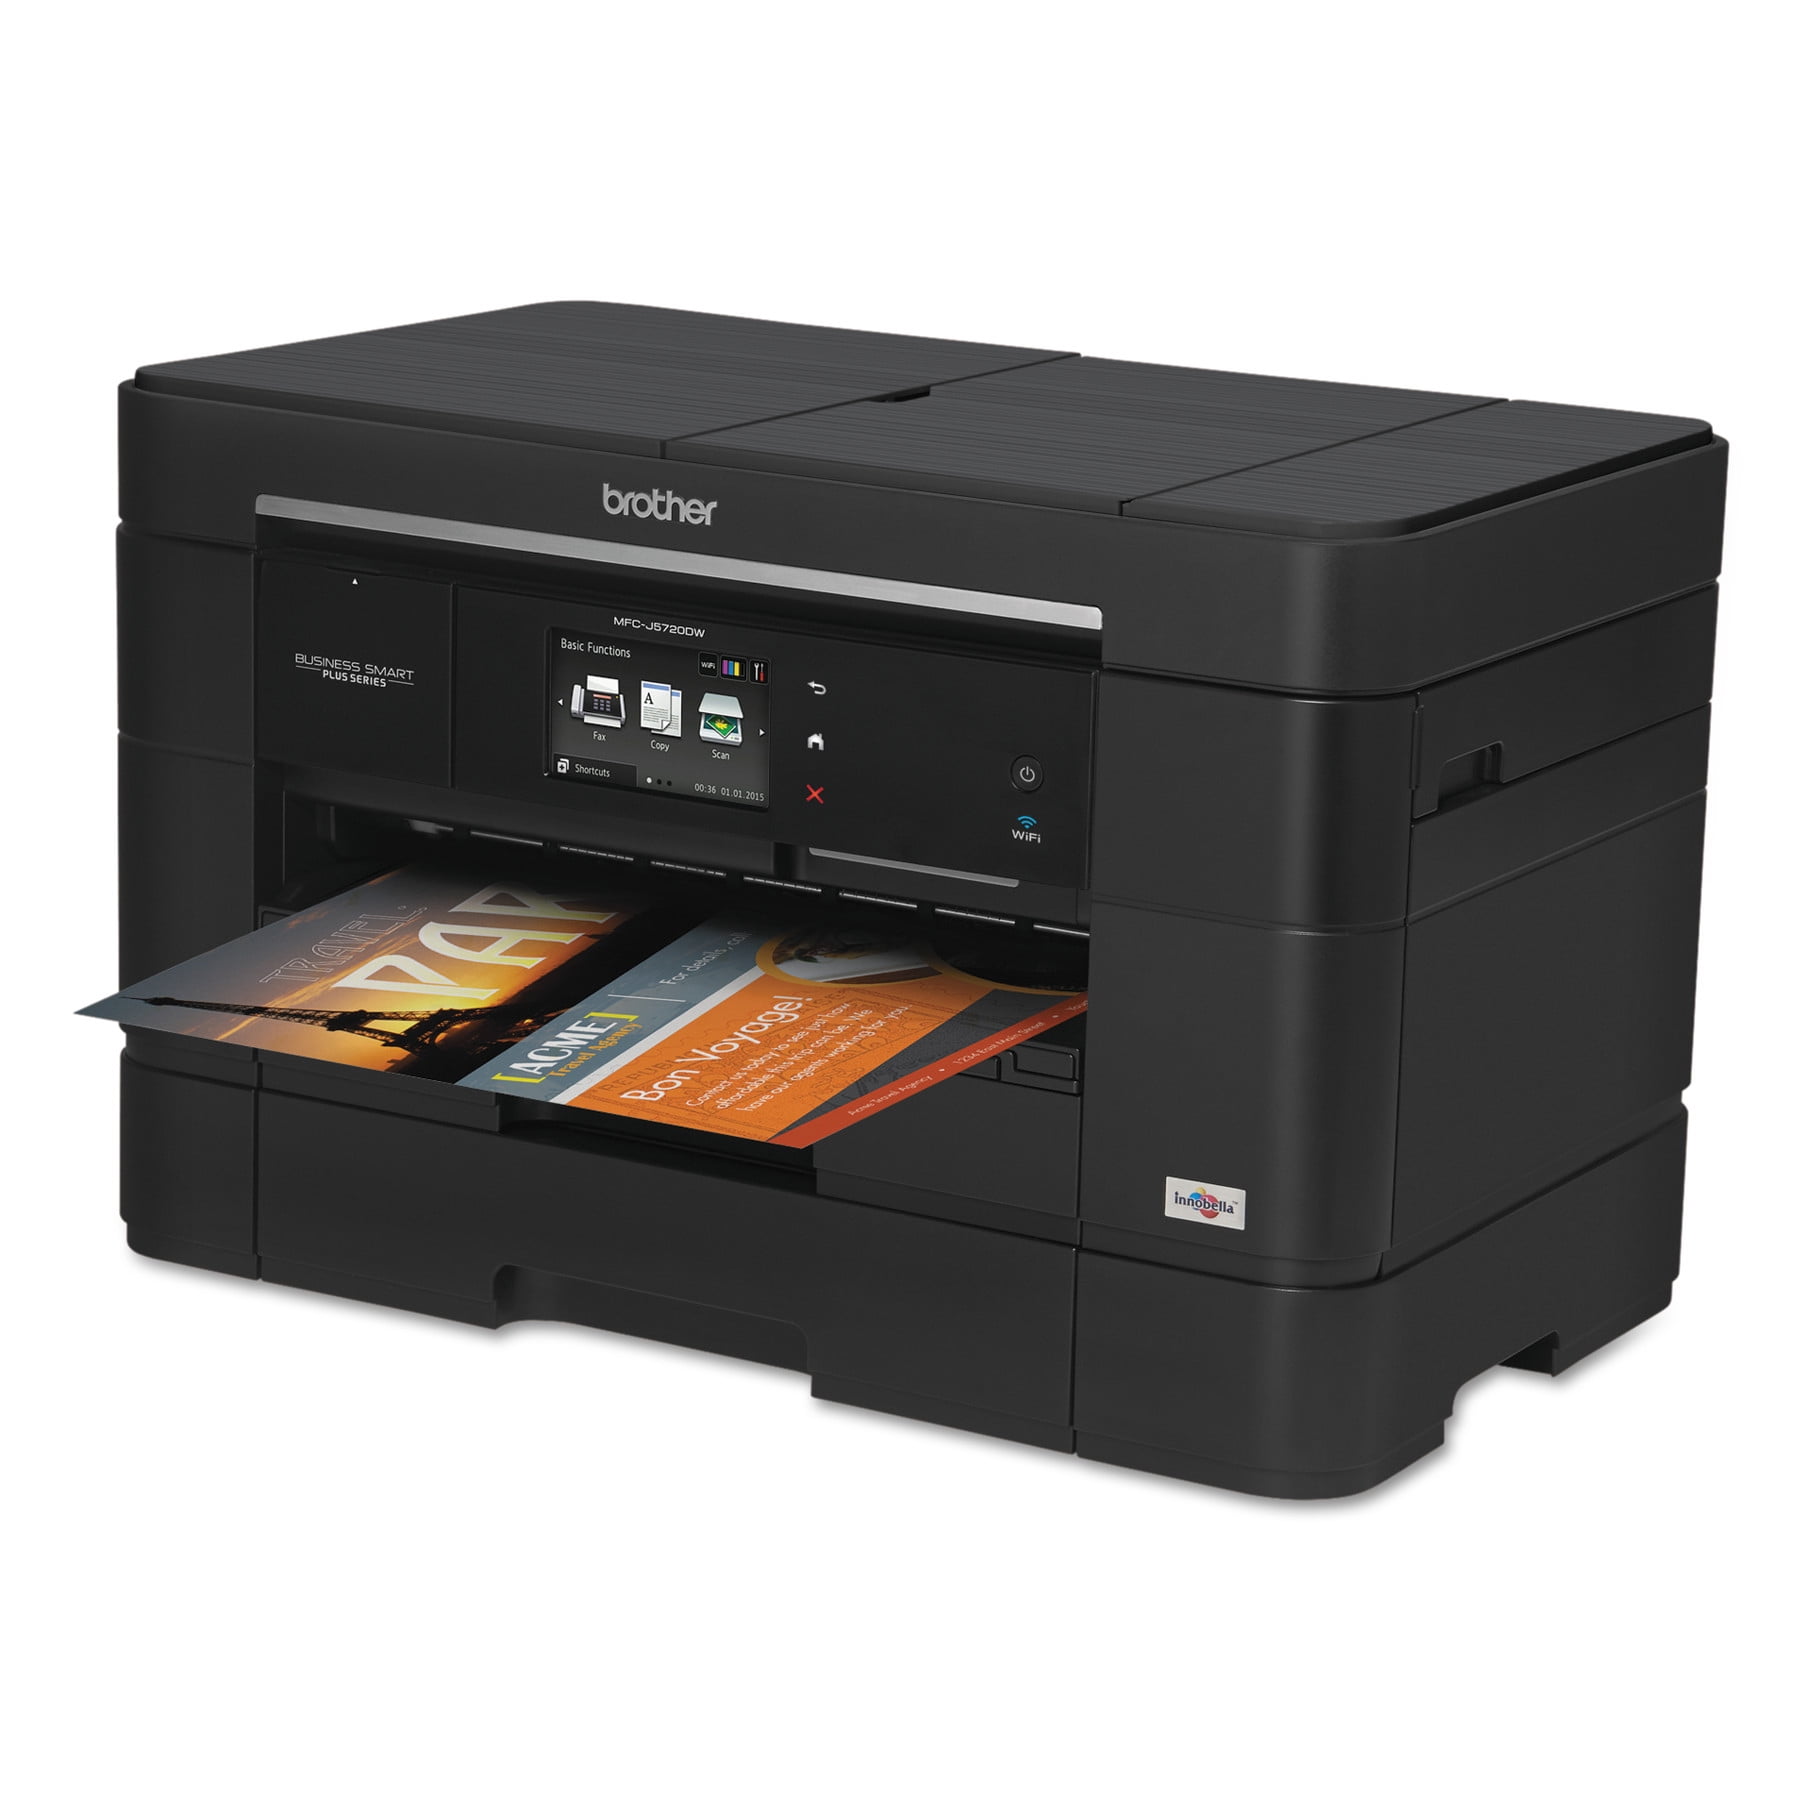 Inficere Cater pumpe Brother Business Smart Plus MFC-J5720DW All-in-One Inkjet Printer,  Copy/Fax/Print/Scan - Walmart.com